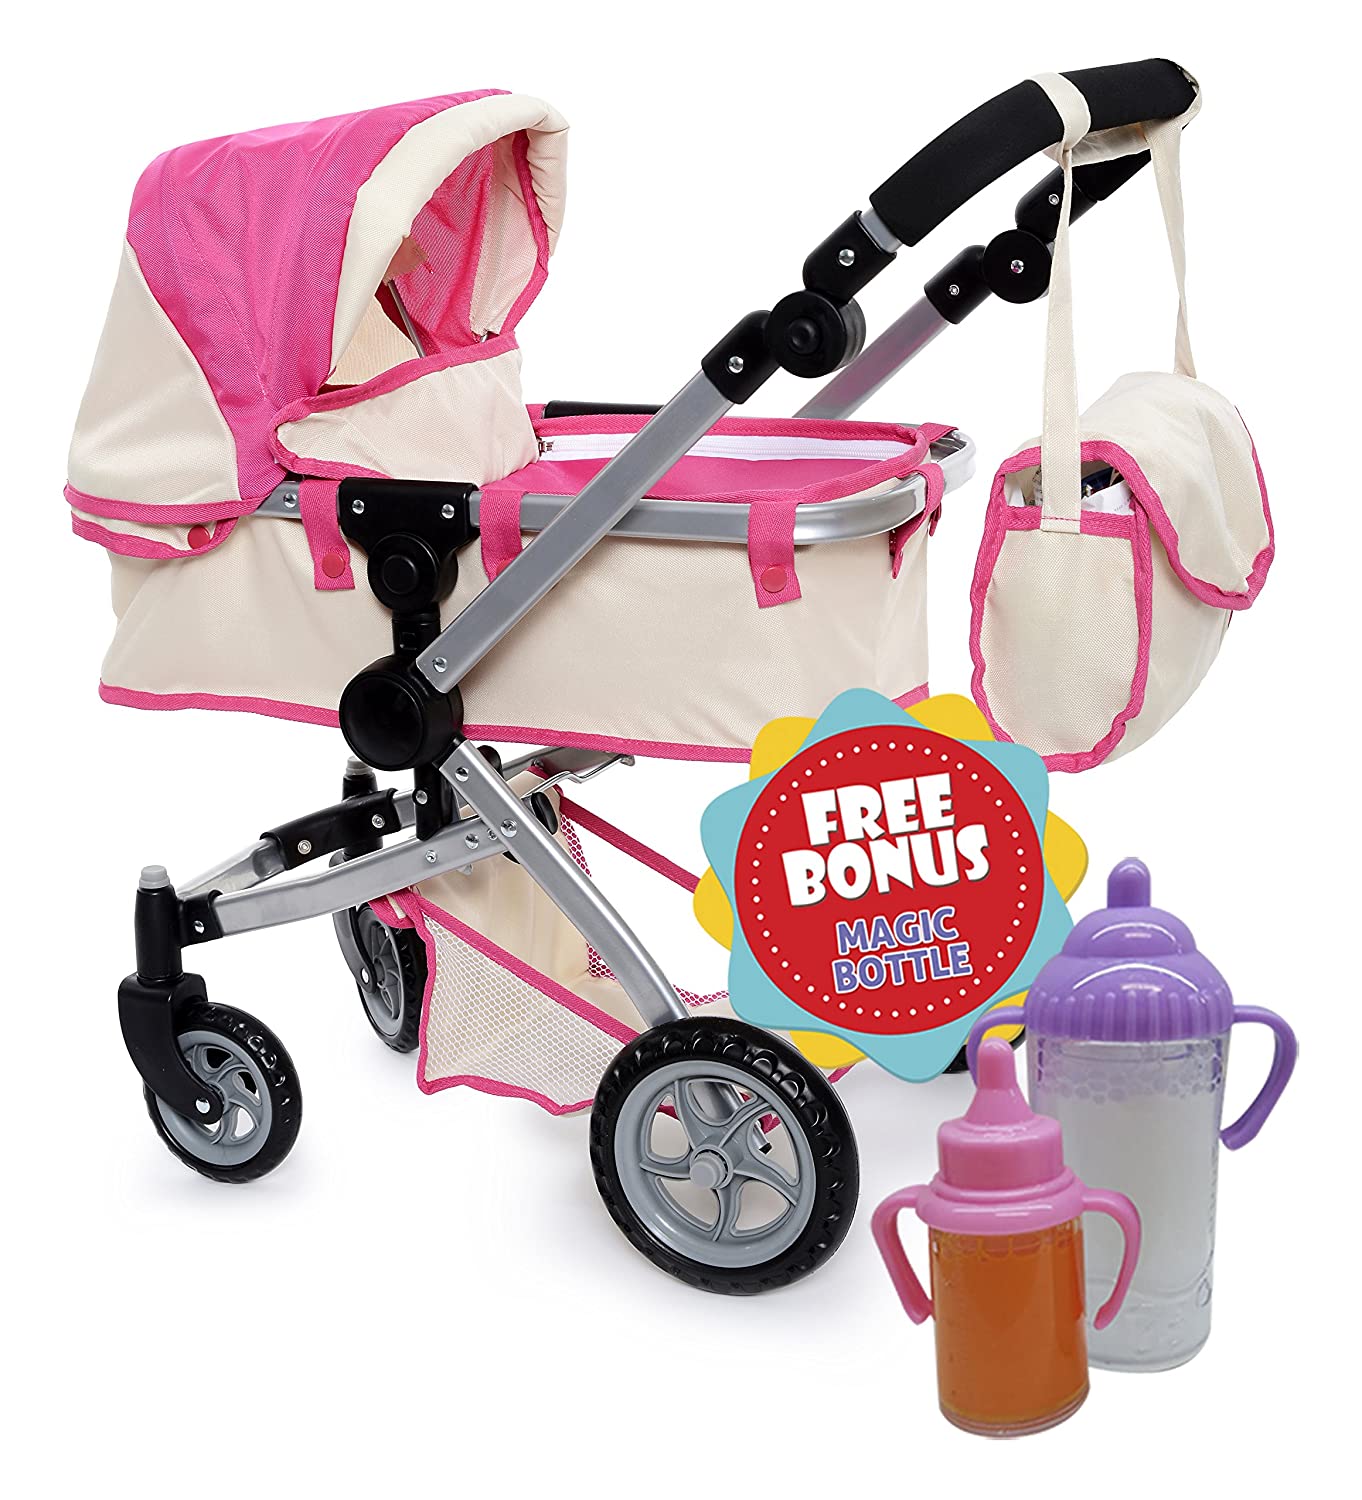 Doll Pram stroller with Swiveling Wheels & Adjustable Handle and Free Diaper Bag